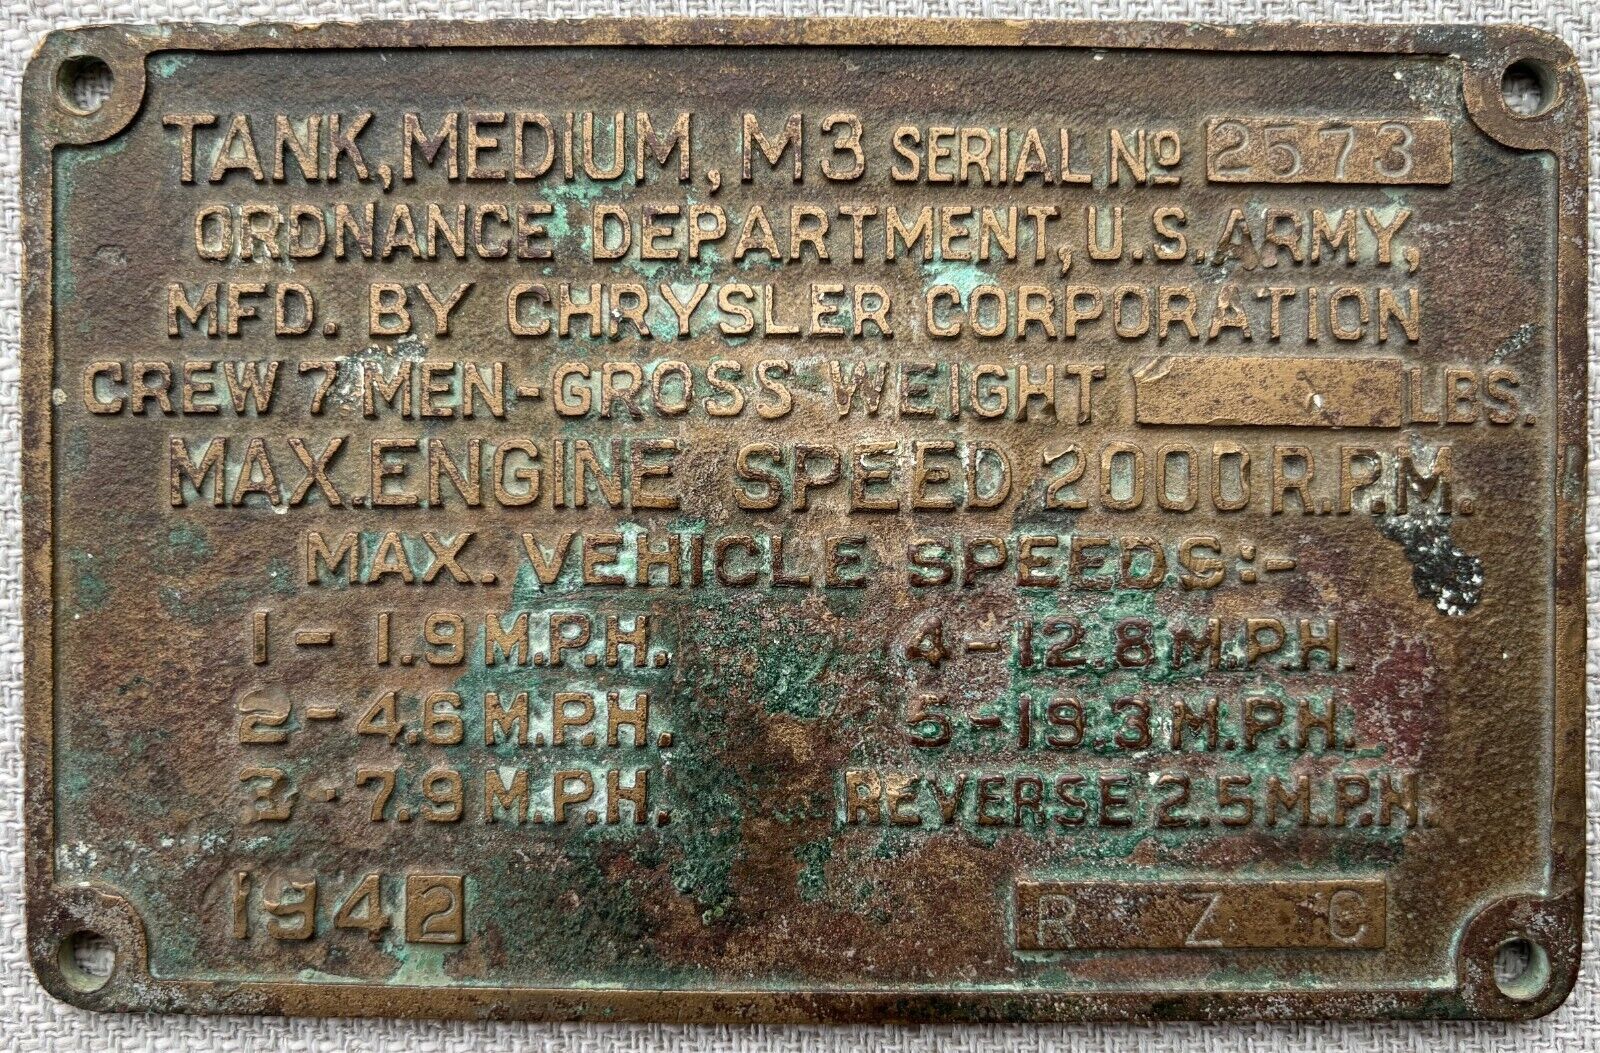 Relic M3 Lee Main Data Plate WW2 Lend Lease Tank Destroyed at Kursk Ultra Rare 